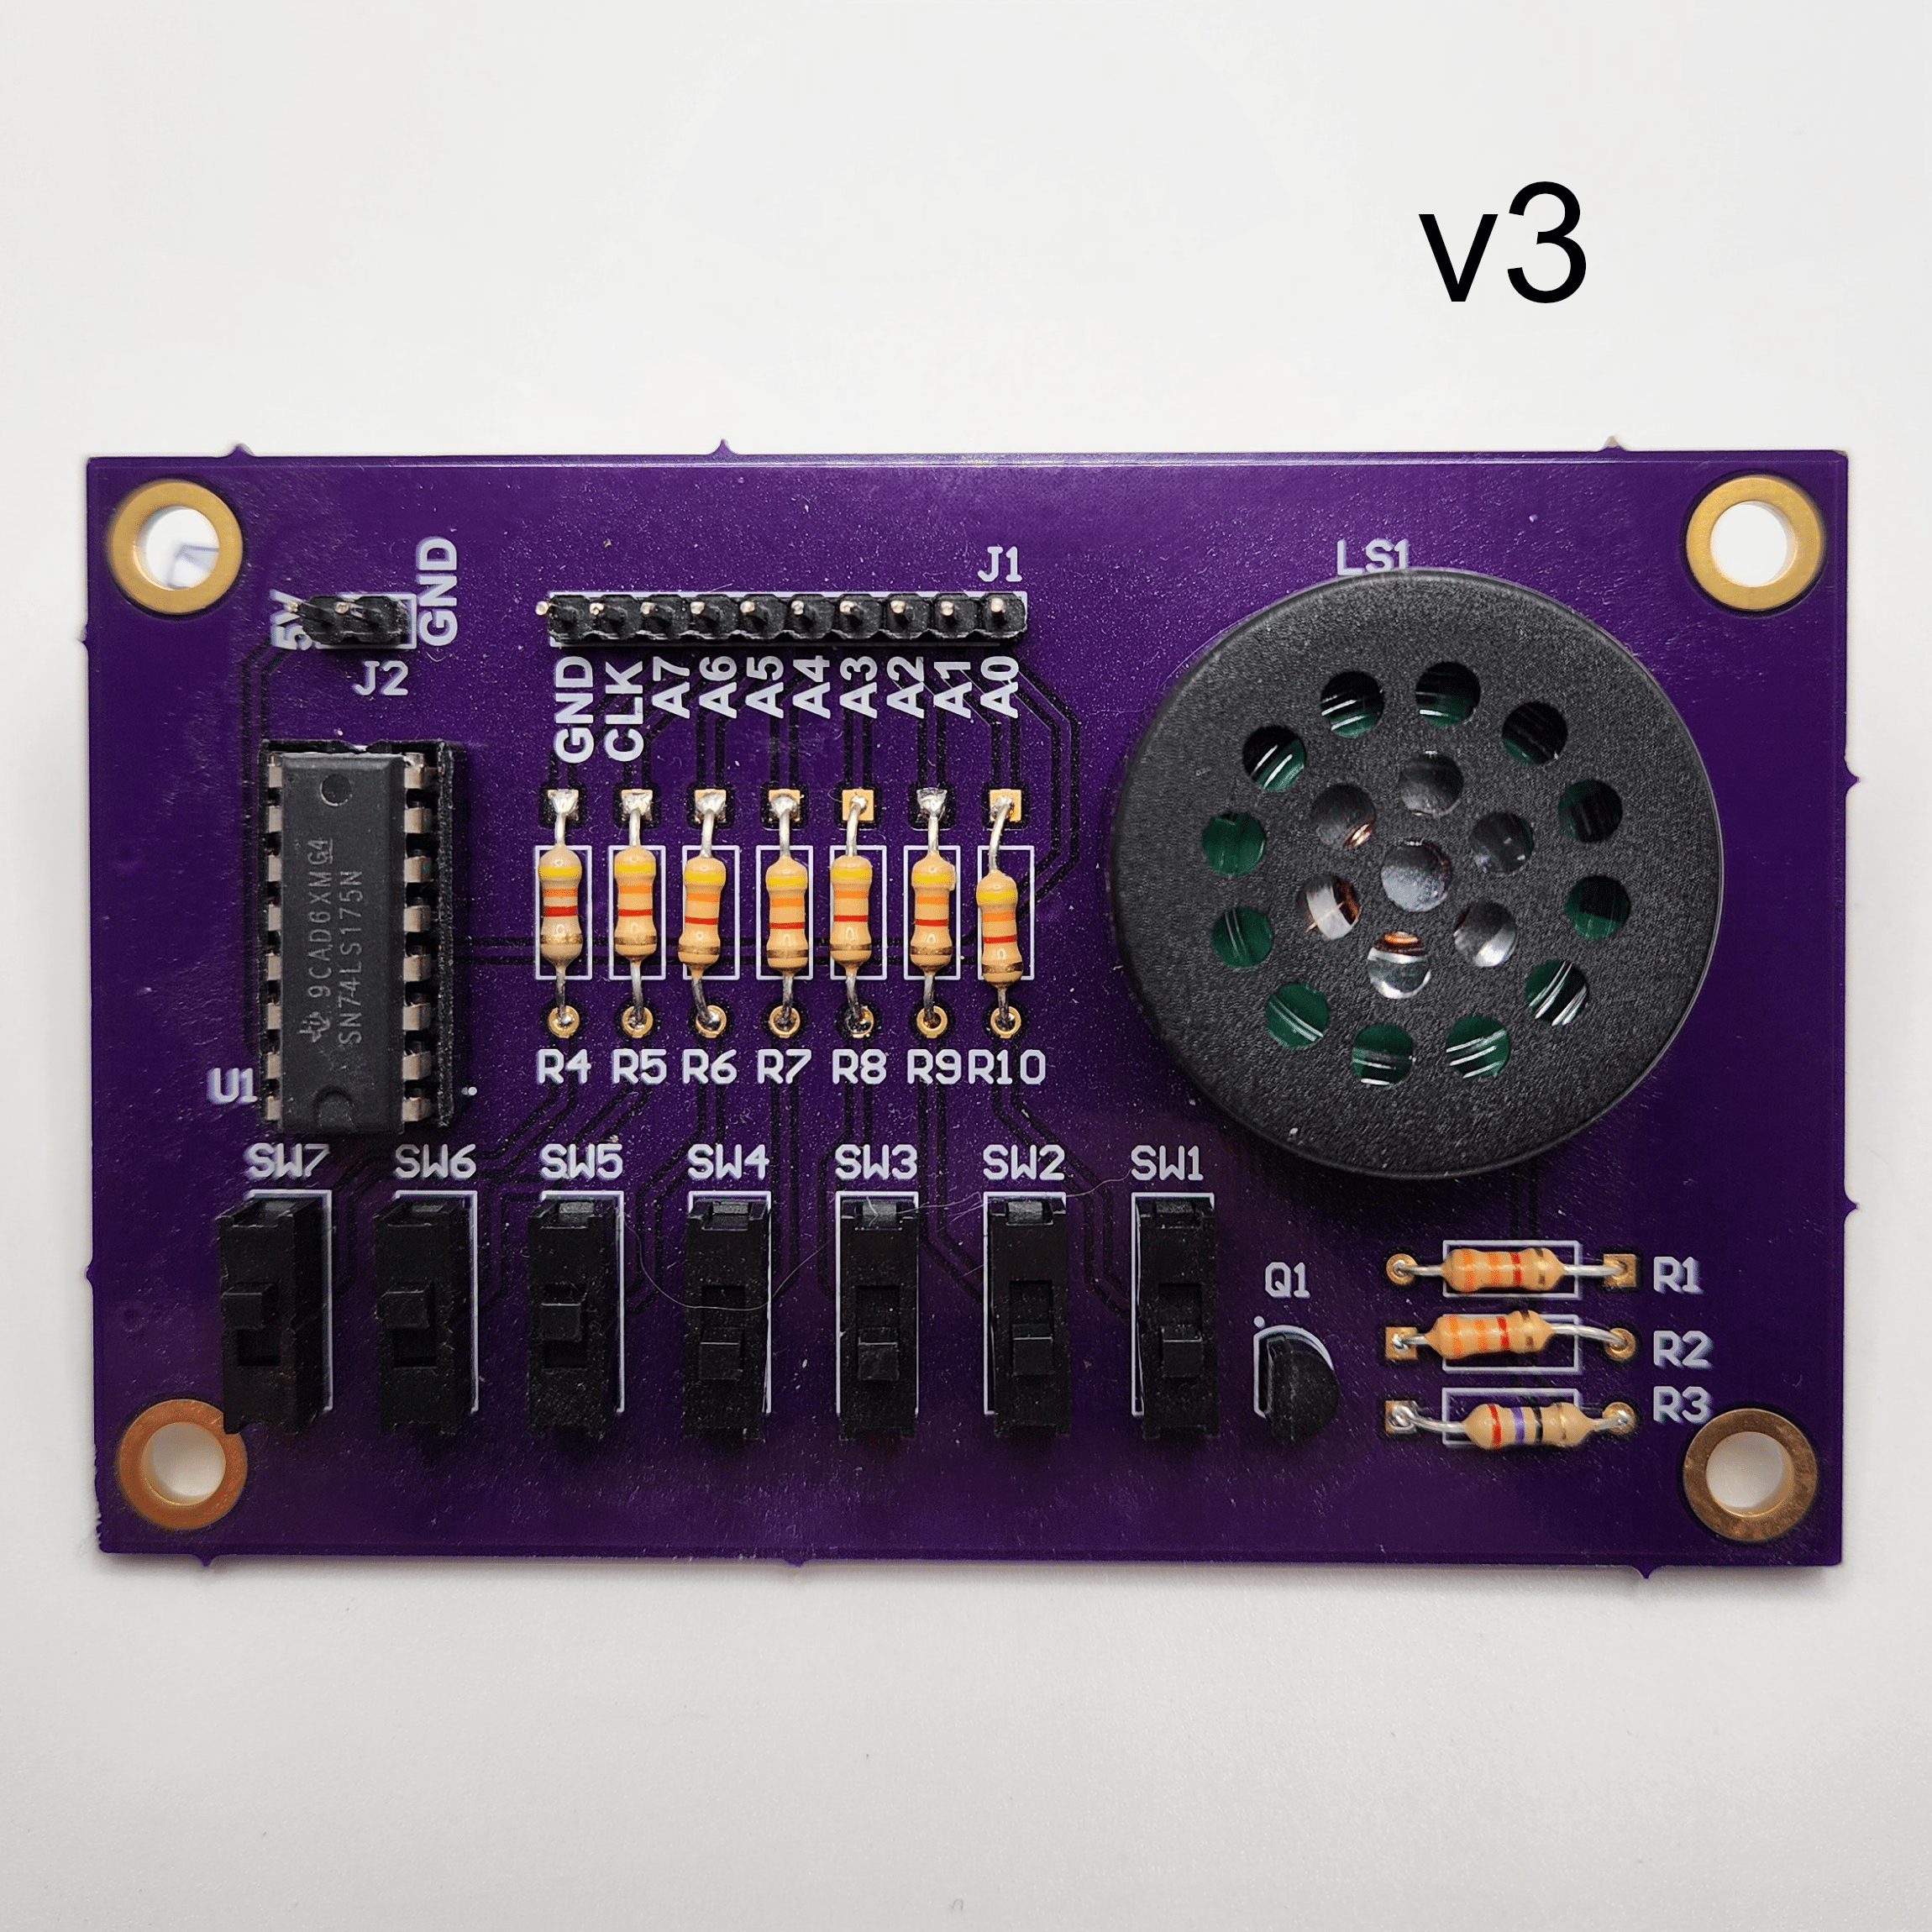 Complete populated Simple Switch and Speaker Demo Board v3 PCB with a text label indicating what version board it is